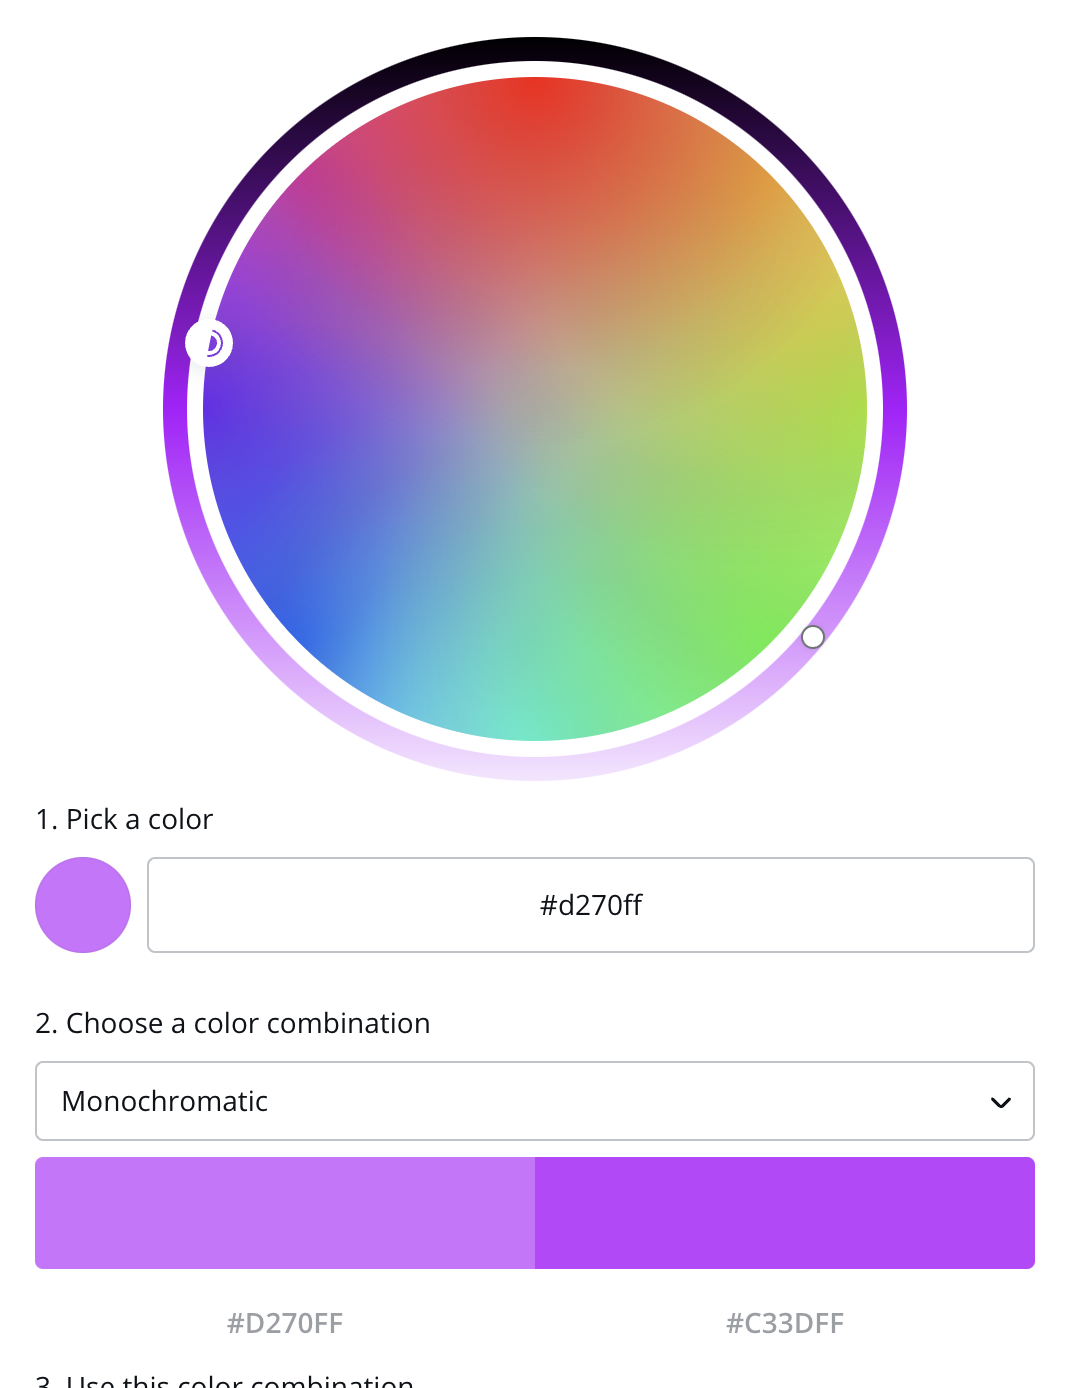 A color wheel showing an example of a monochromatic color scheme